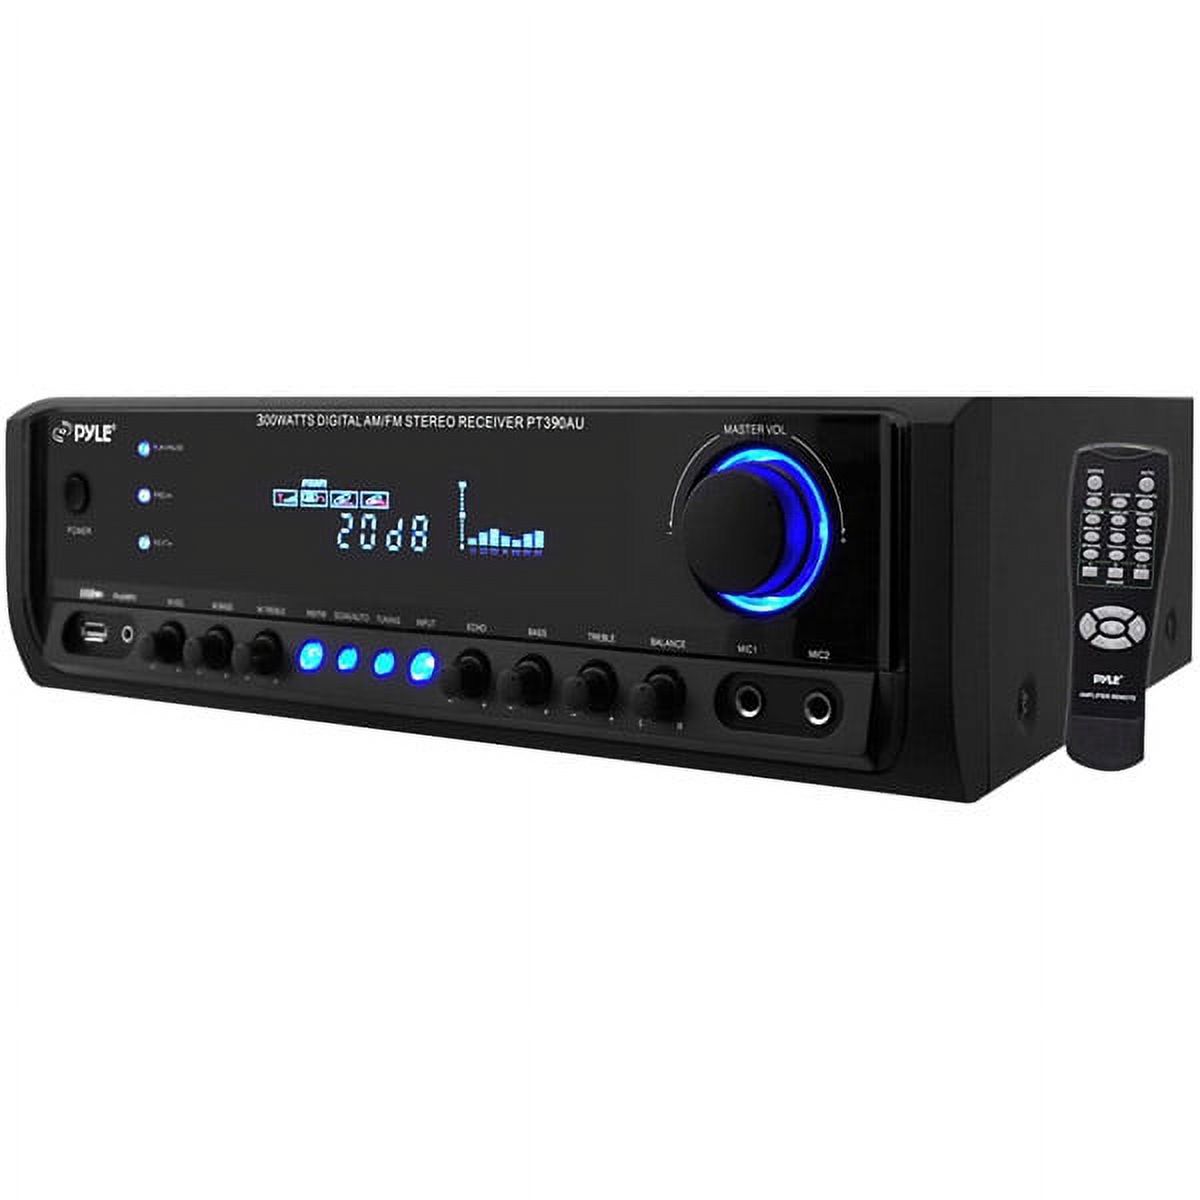 New Pyle PT390AU 300W 4 Channel Home Theater Amplifier Receiver Stereo USB/SD - image 1 of 6